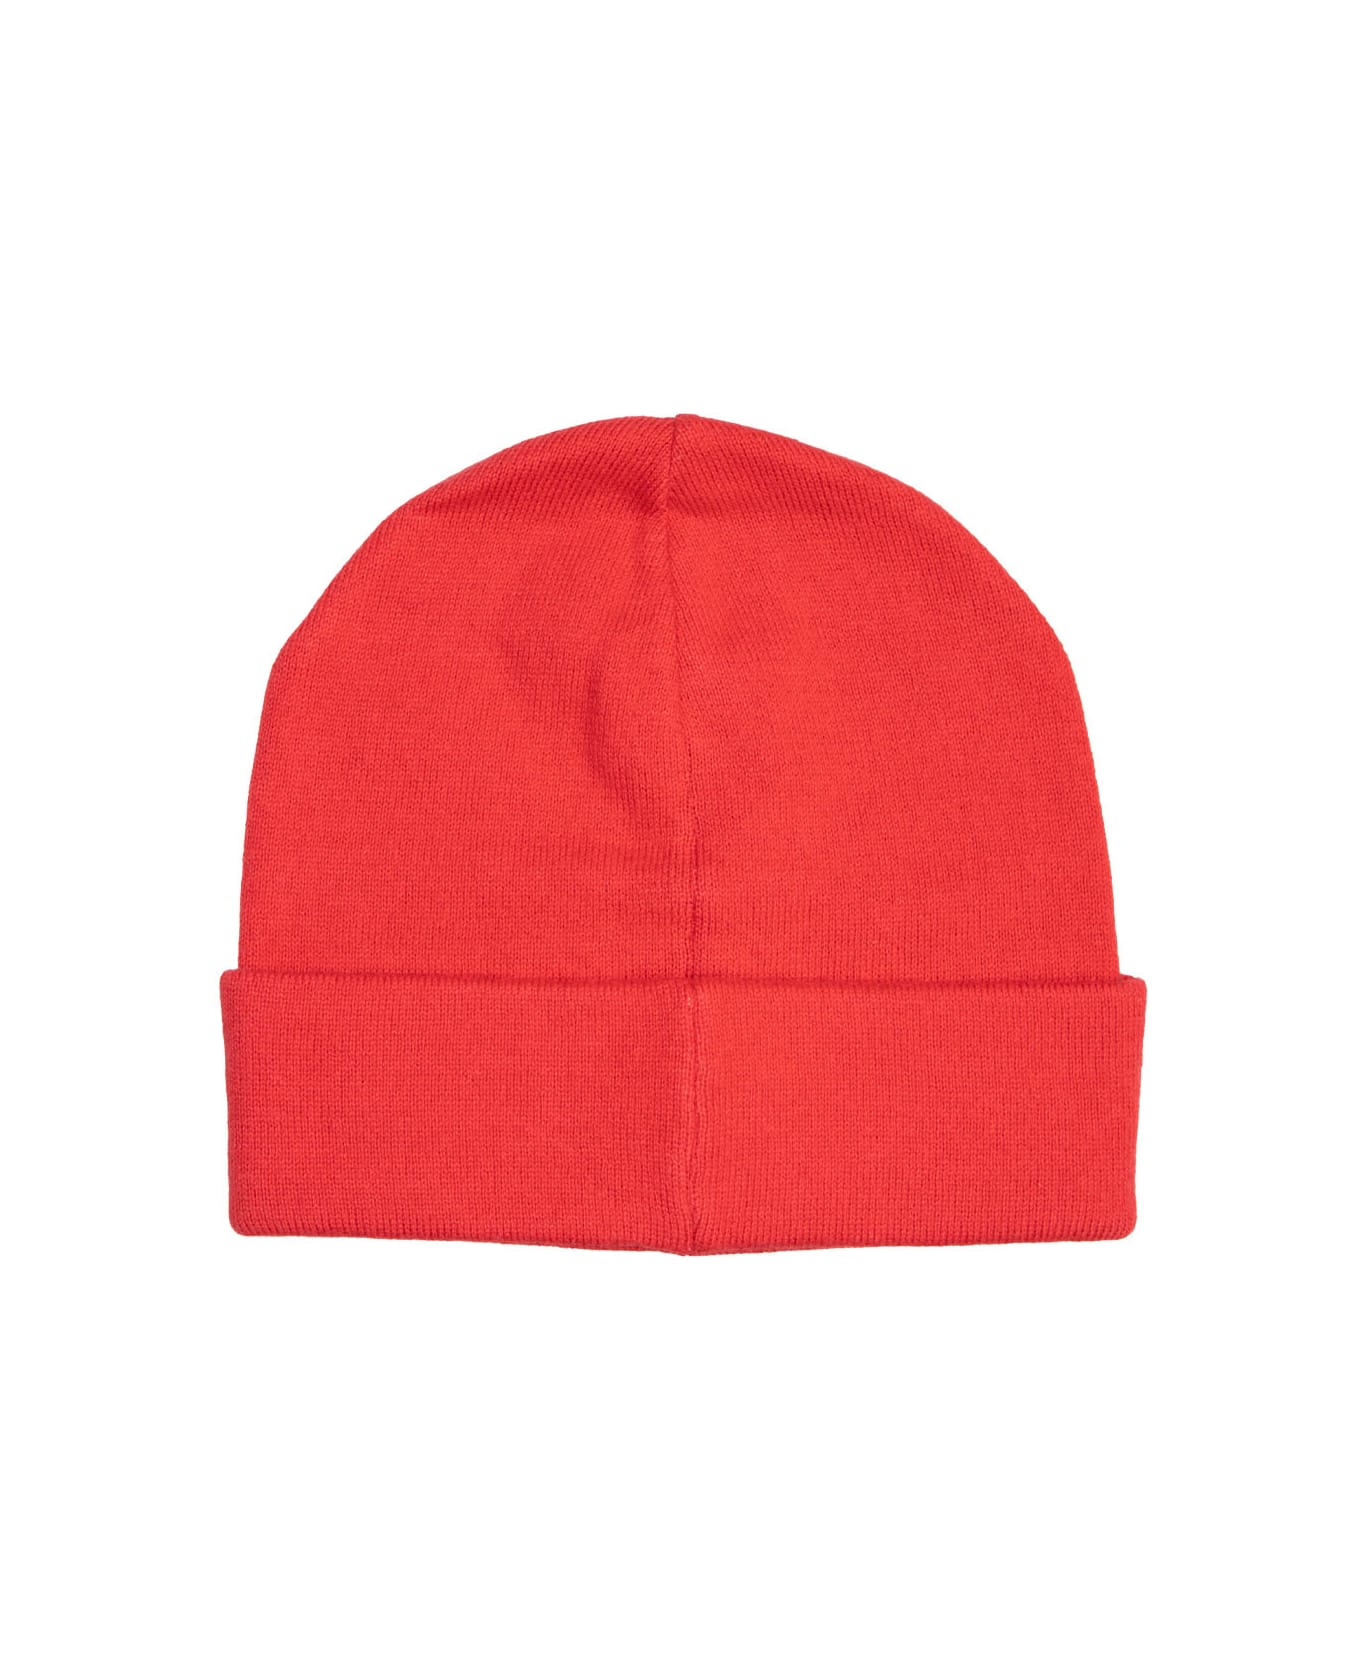 Givenchy Cotton And Cashmere Hat - Red